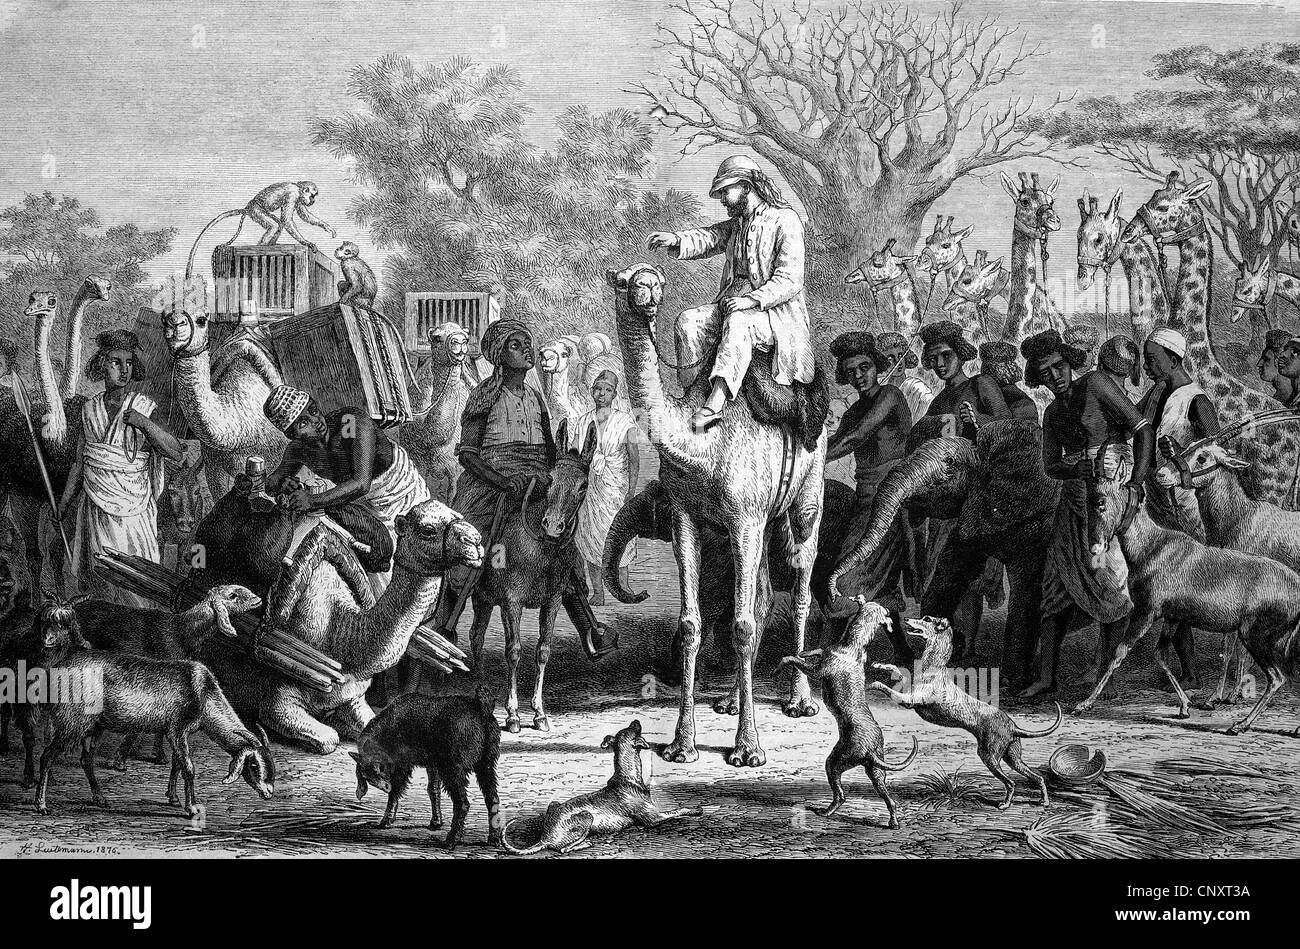 Loading and departure of an African wildlife expedition, historical engraving, 1888 Stock Photo